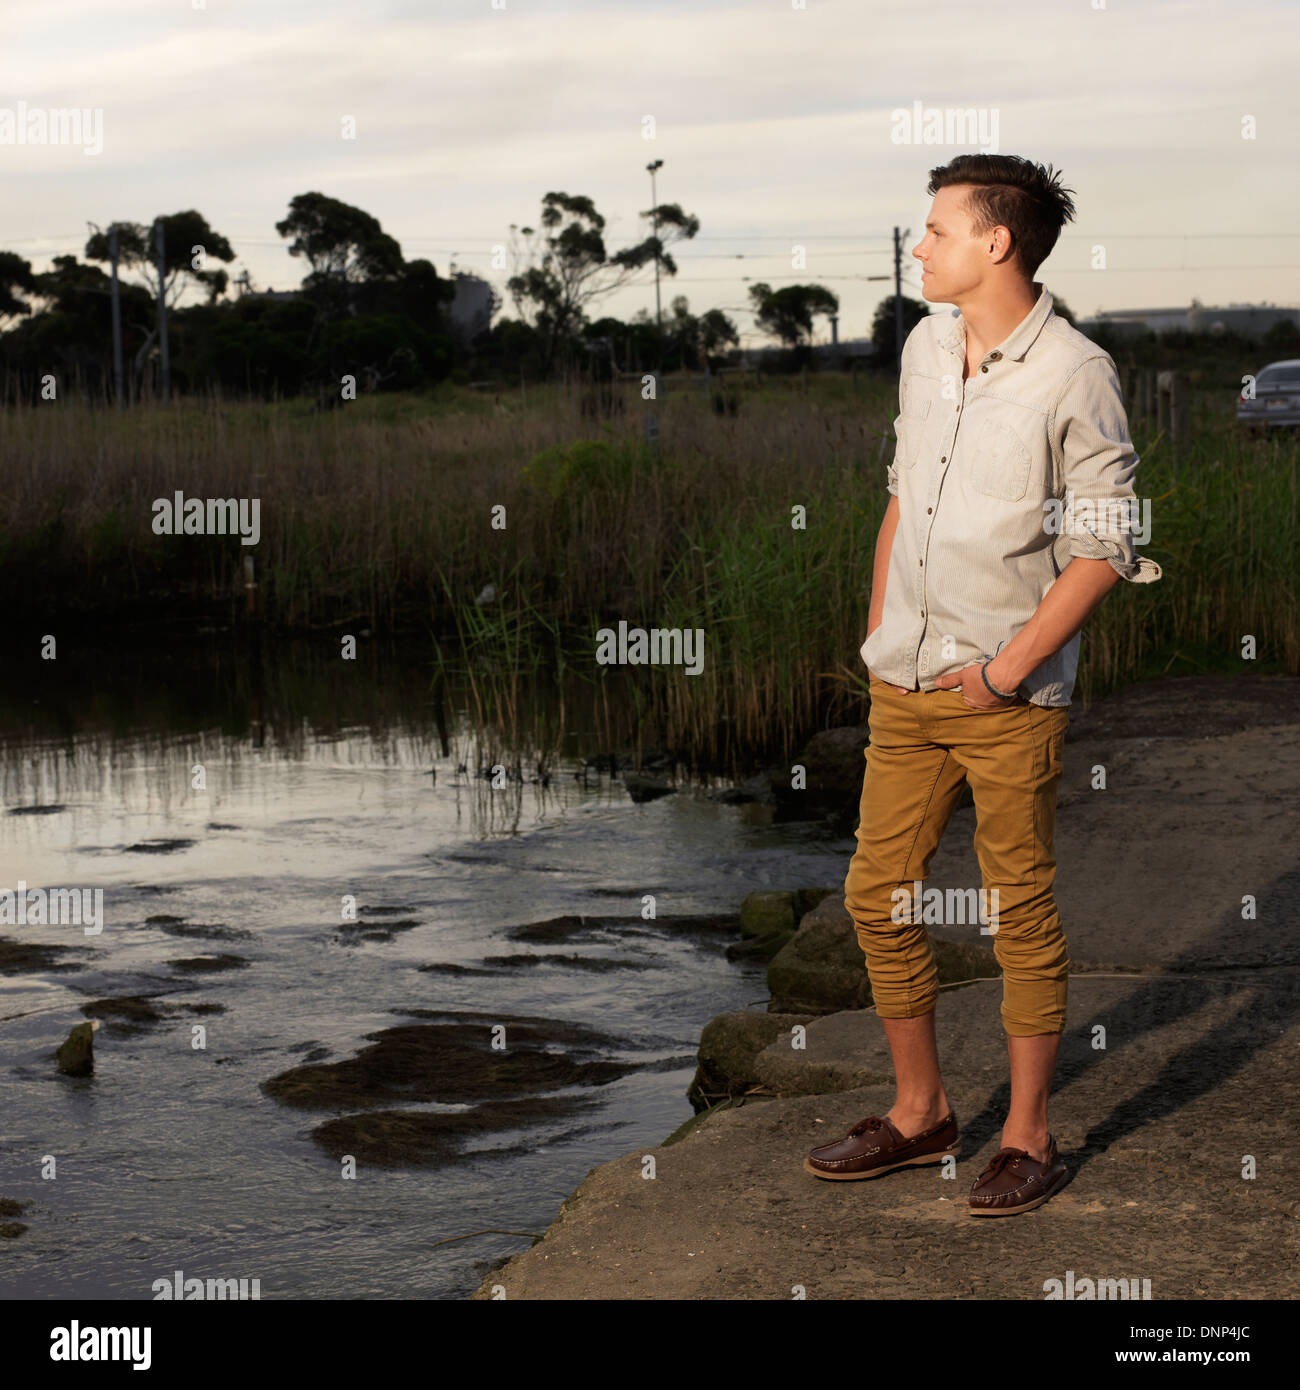 evening scene of young man looking into the distance Stock Photo